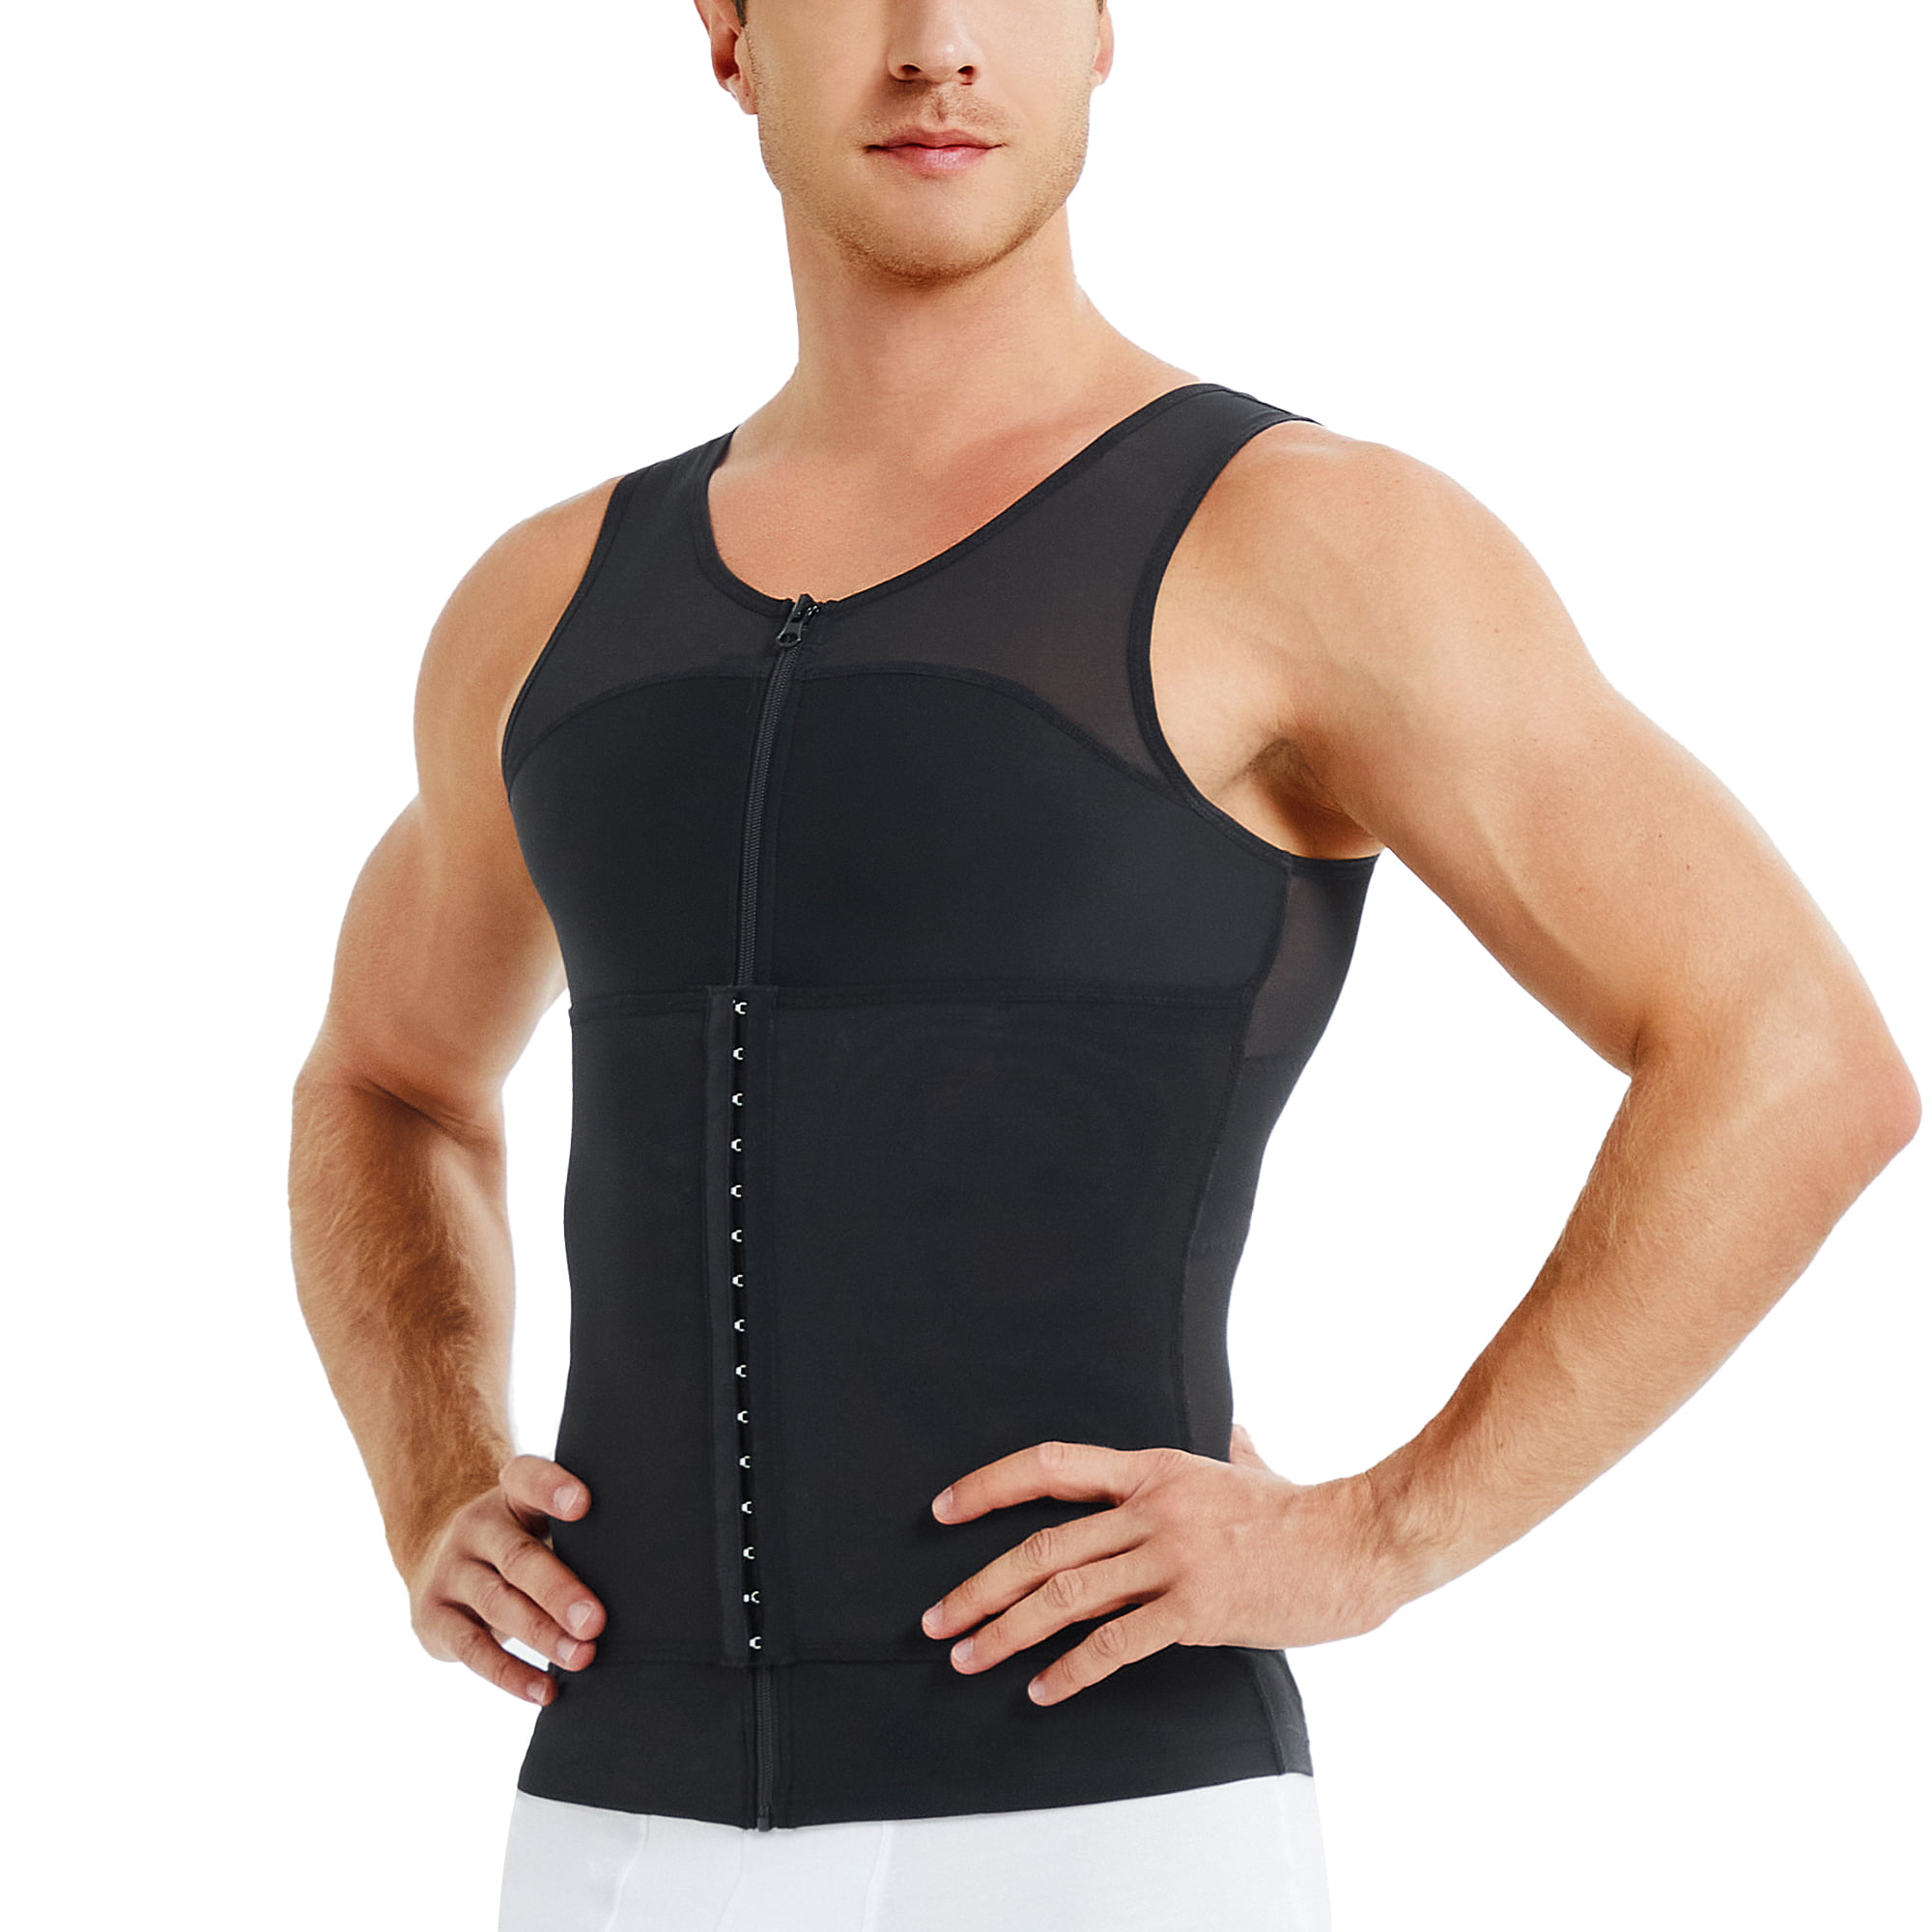 Gotoly Mens Compression Shirts Tummy Control Shapewear Tight Undershirt  Slimming Body Shaper Vest Workout Tank Top (Black Small) 